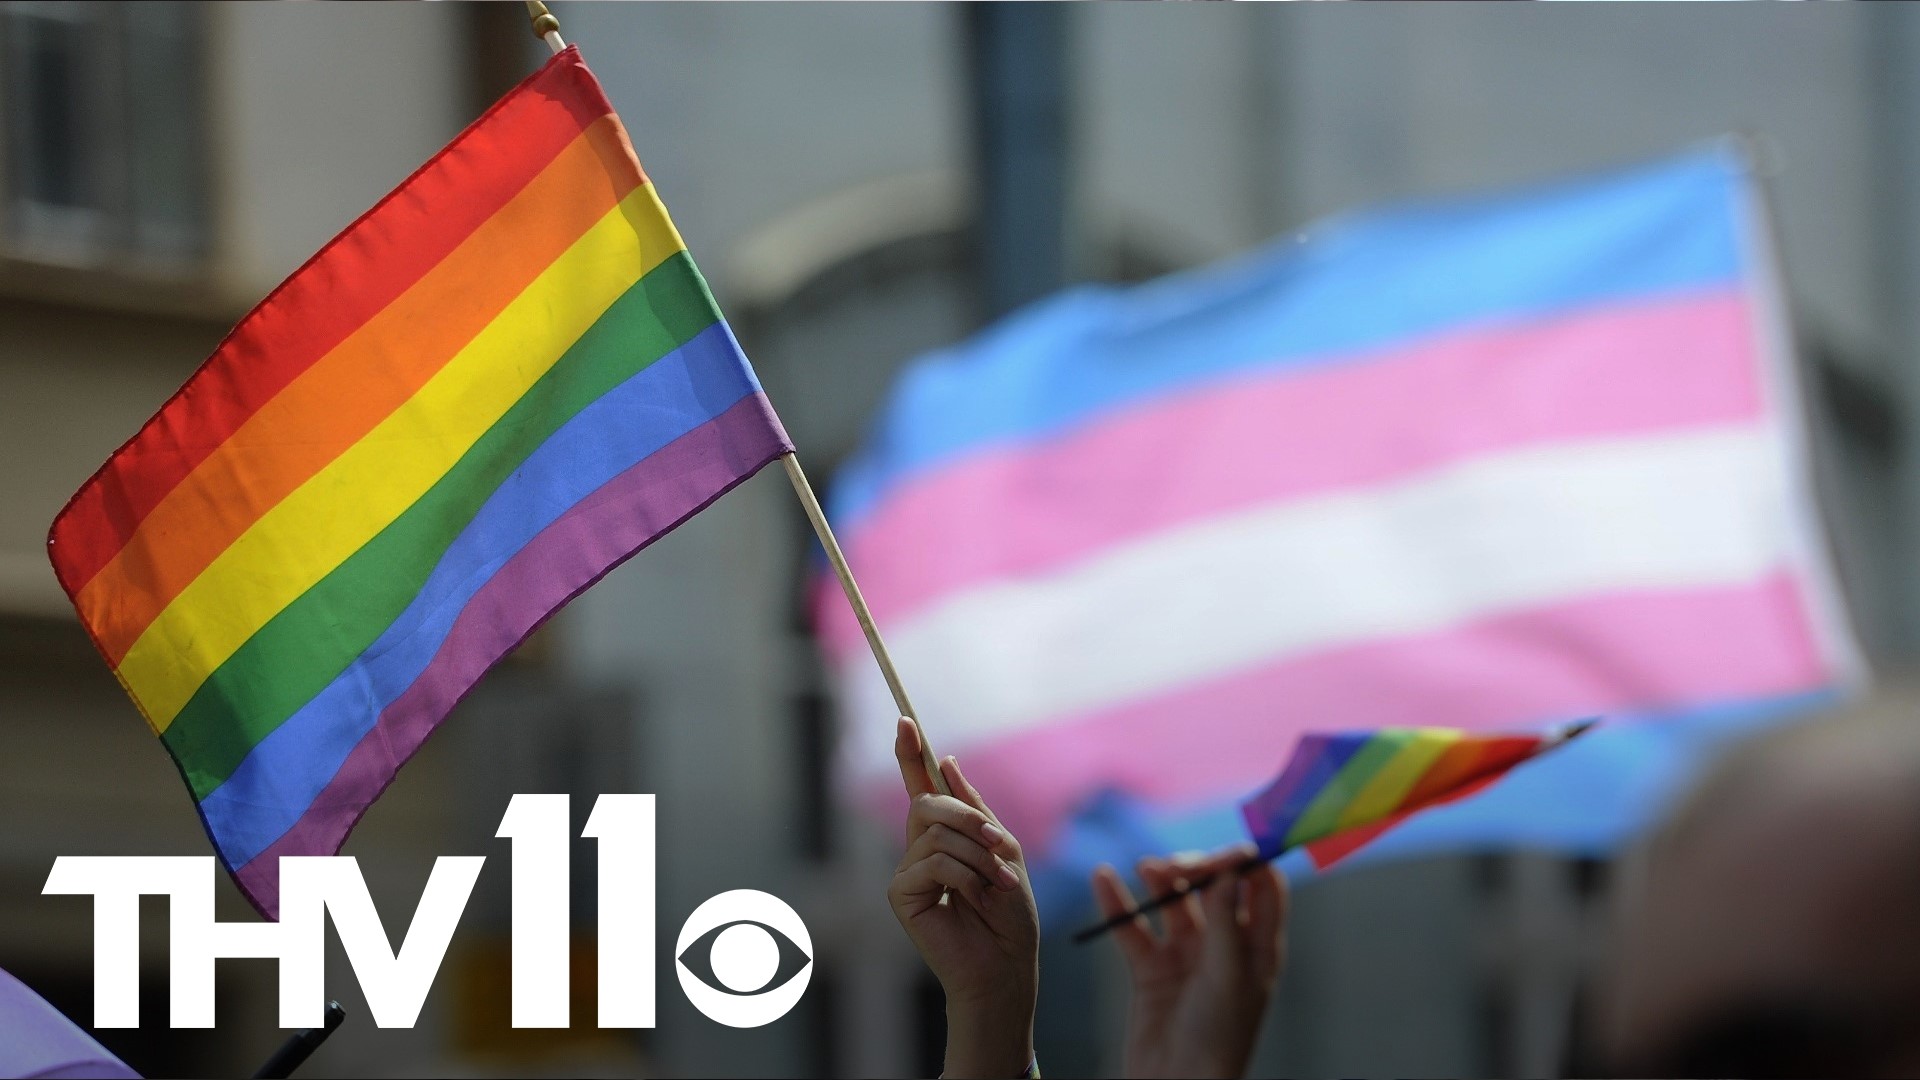 A federal judge has blocked Arkansas’s ban on gender-affirming care for minors, saying it violates the U.S. Constitution.